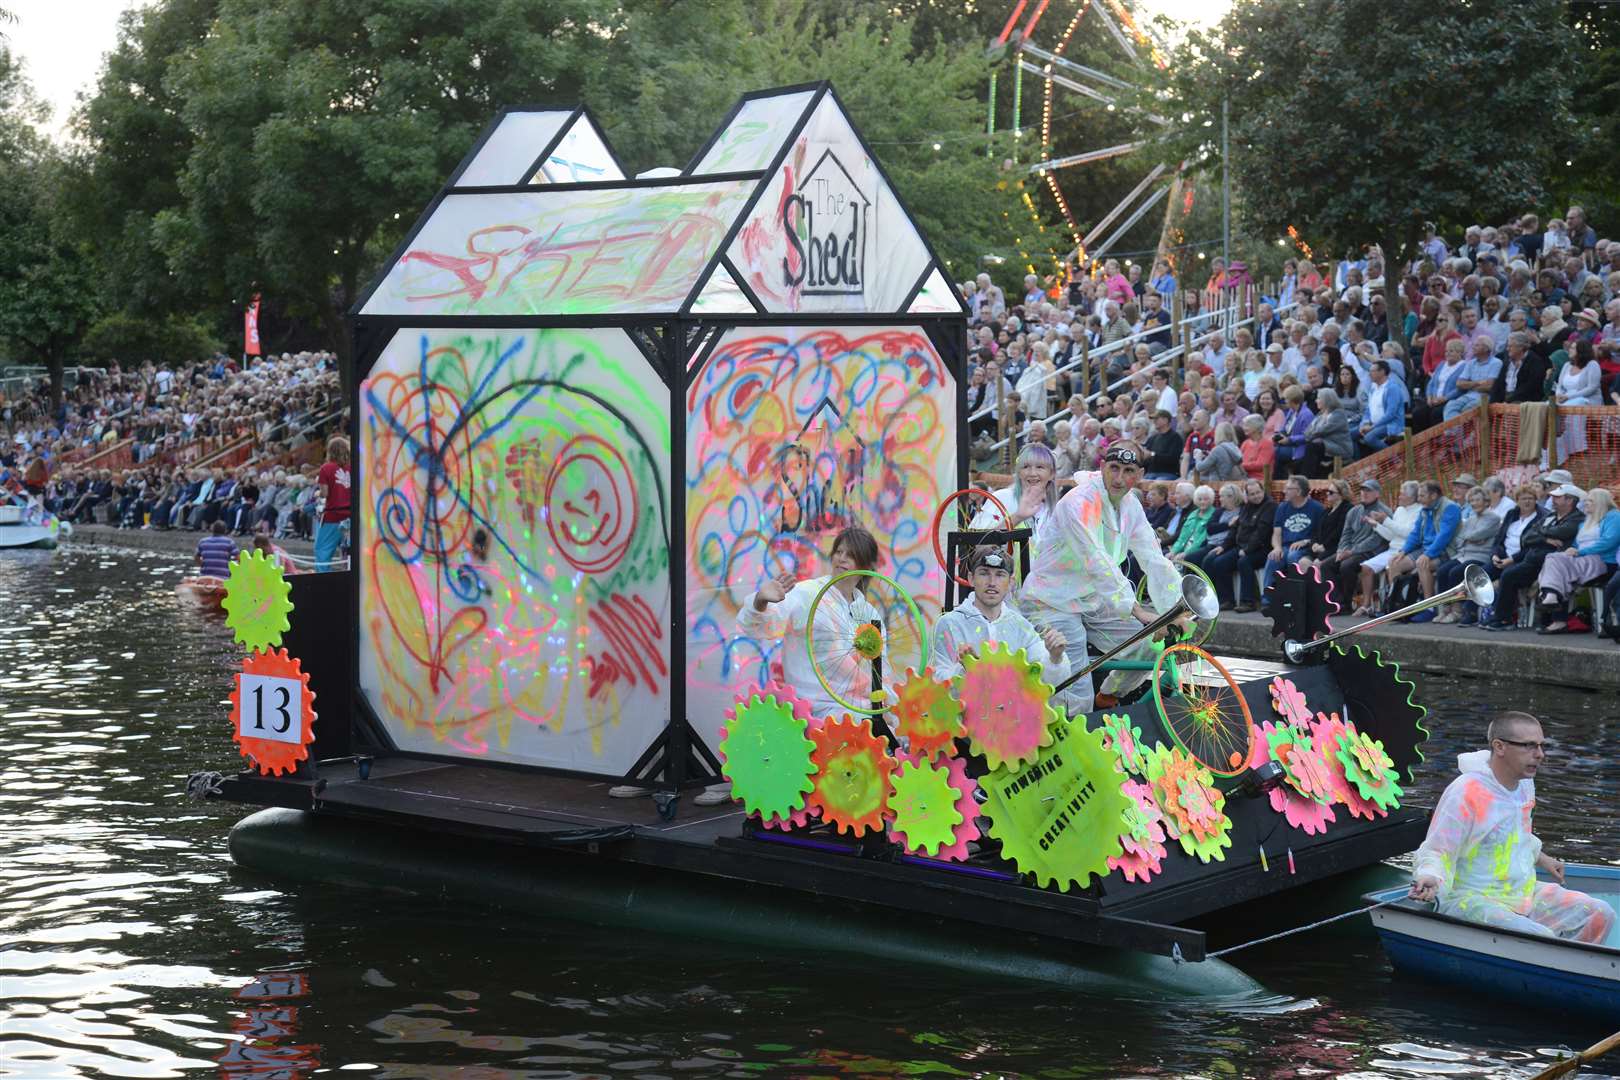 The Shed float